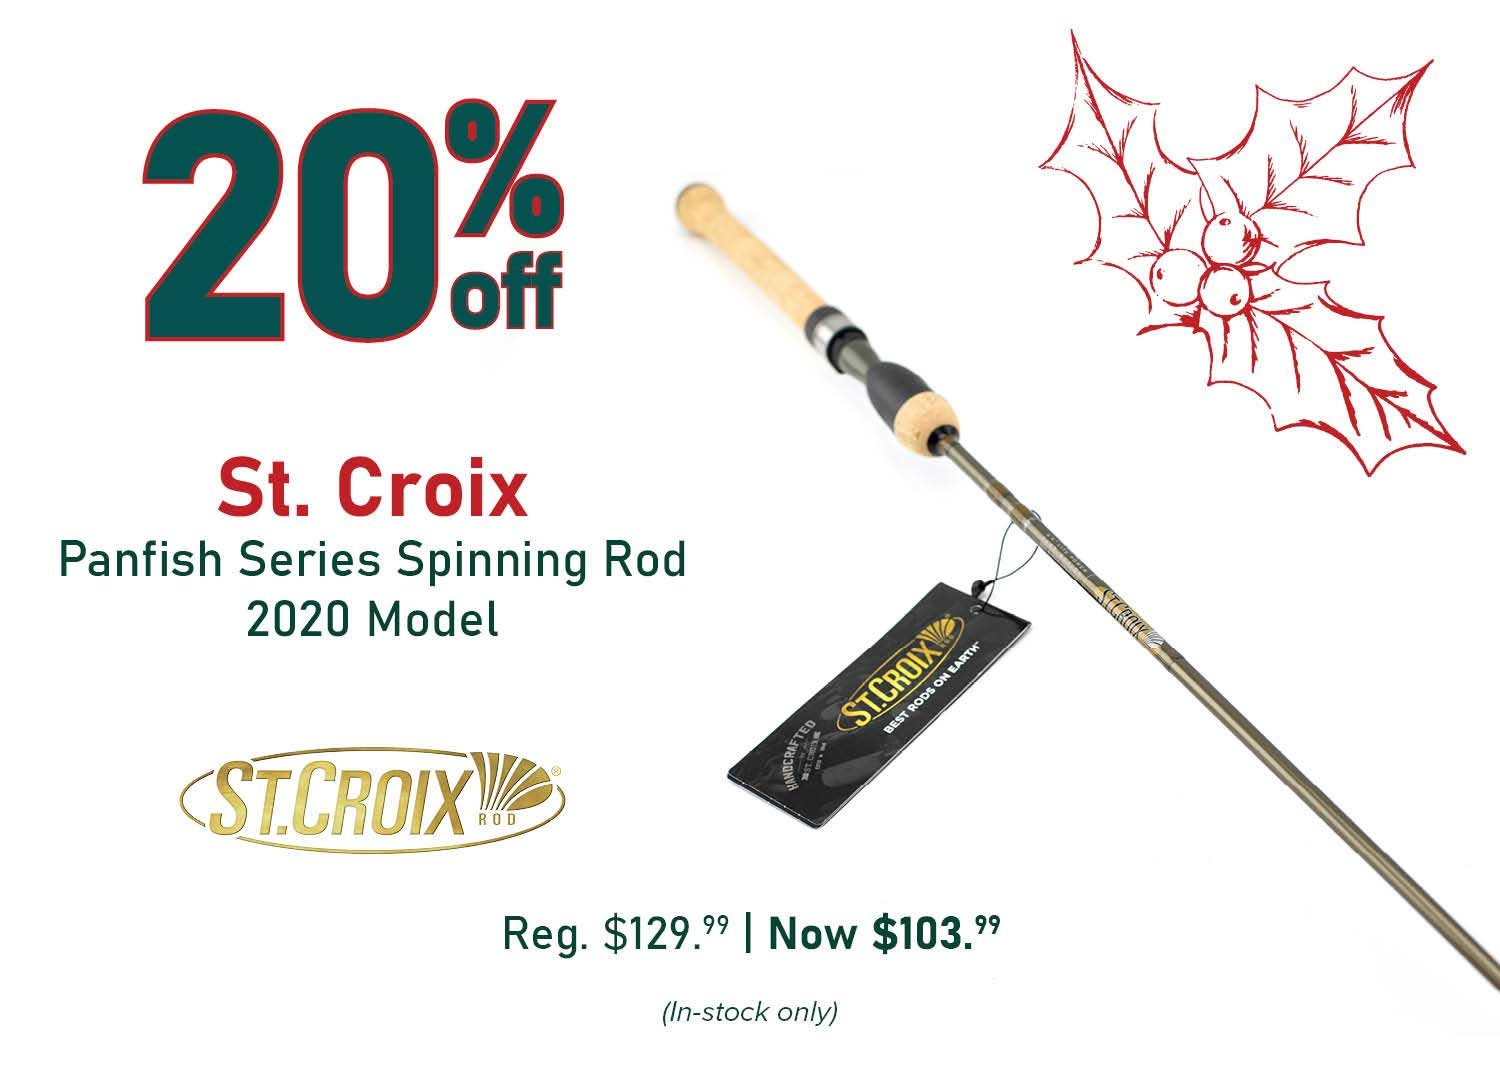 FishUSA.com: Save Up To 25% On Select St. Croix & Shimano Rods Today Only